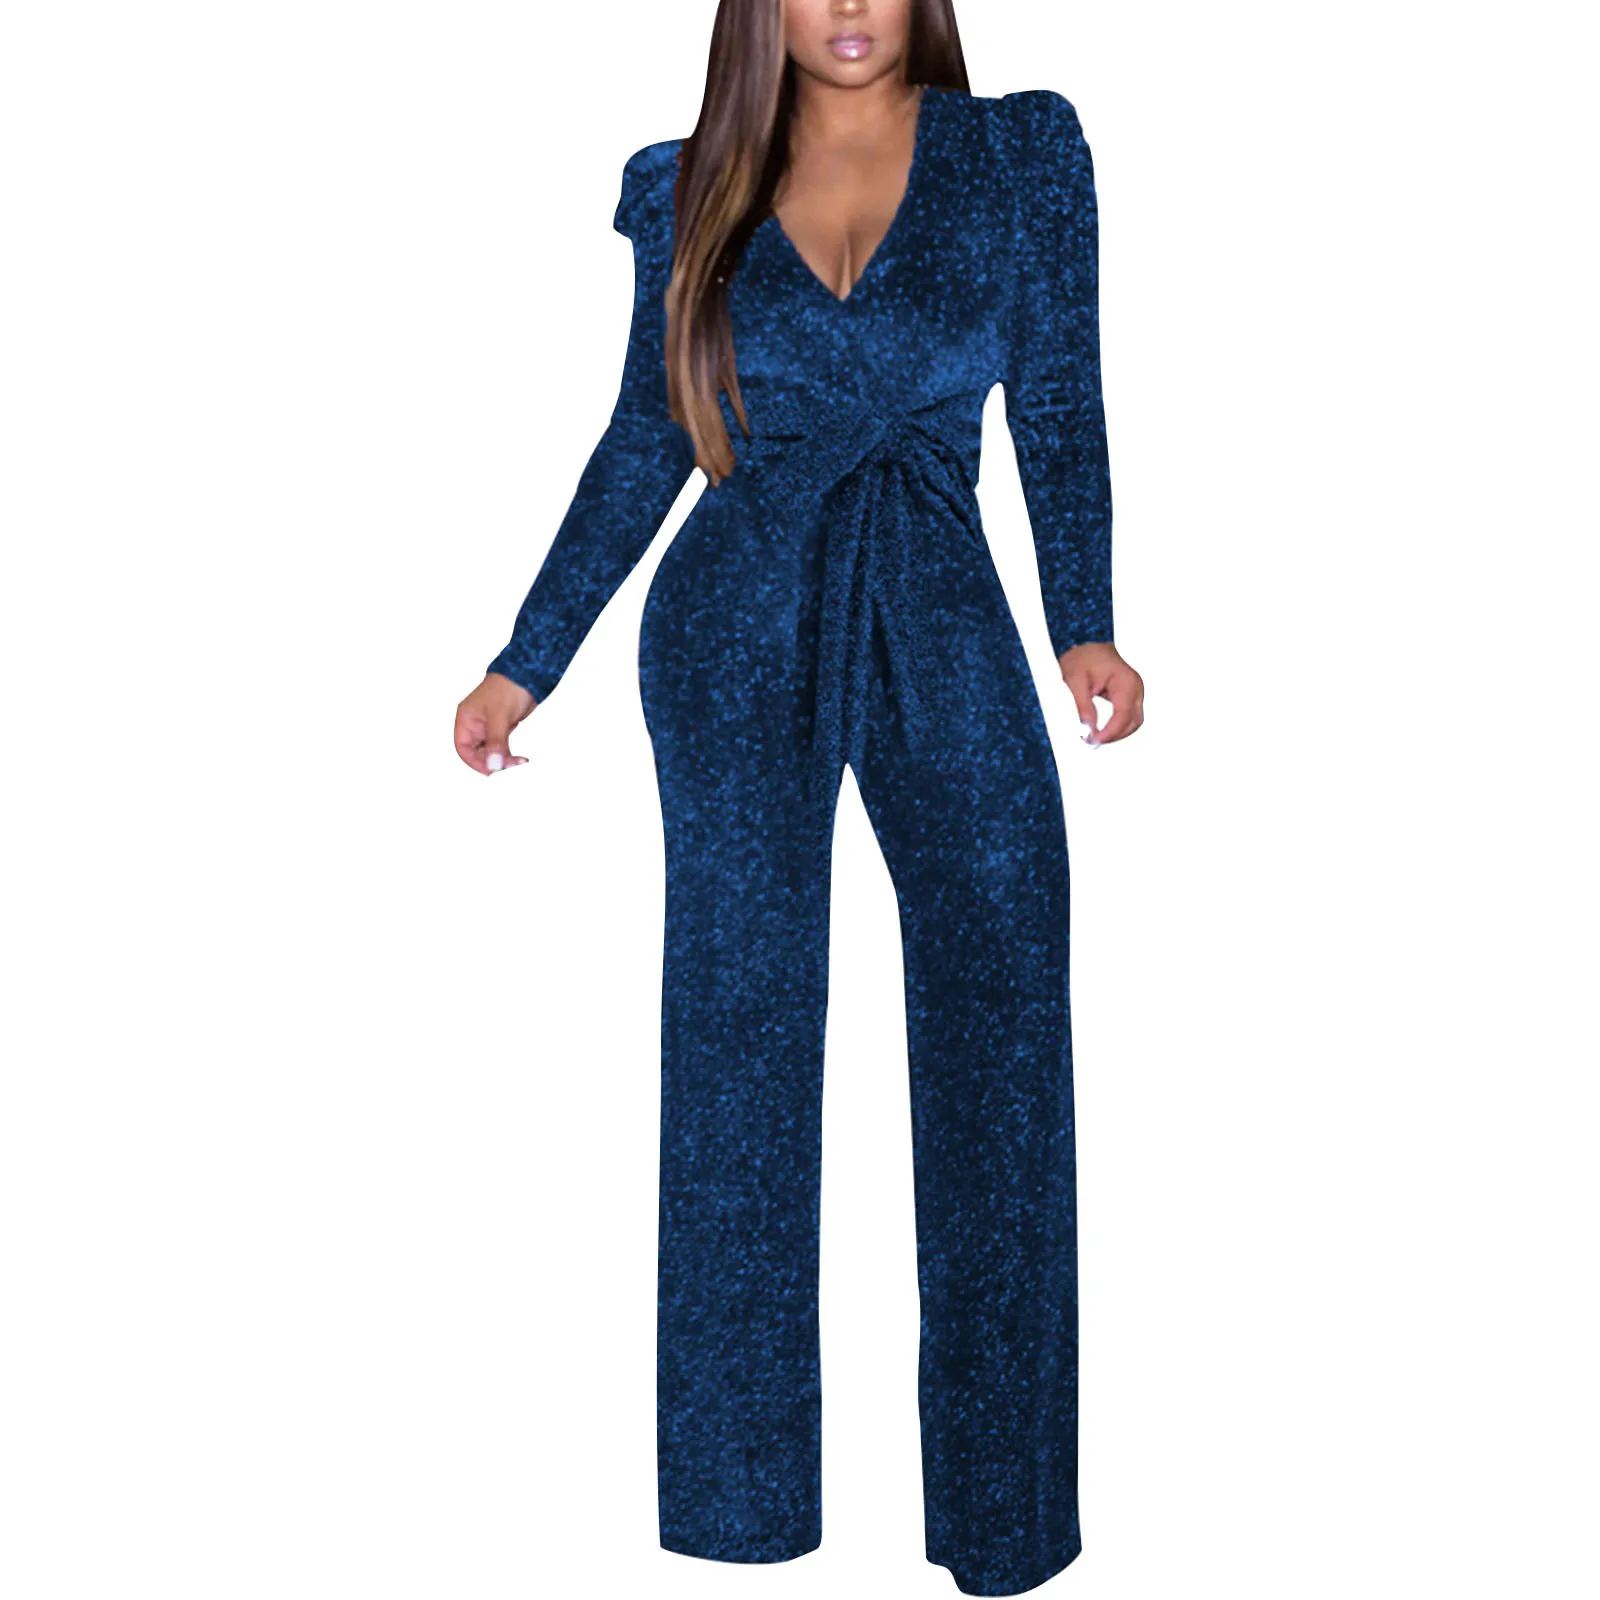 

Women's Sultry V Neck Strap High Elastic Metallic Fiber Lingerie Style Pant Suit With Sparkling Floral Printed Jumpsuits Womens